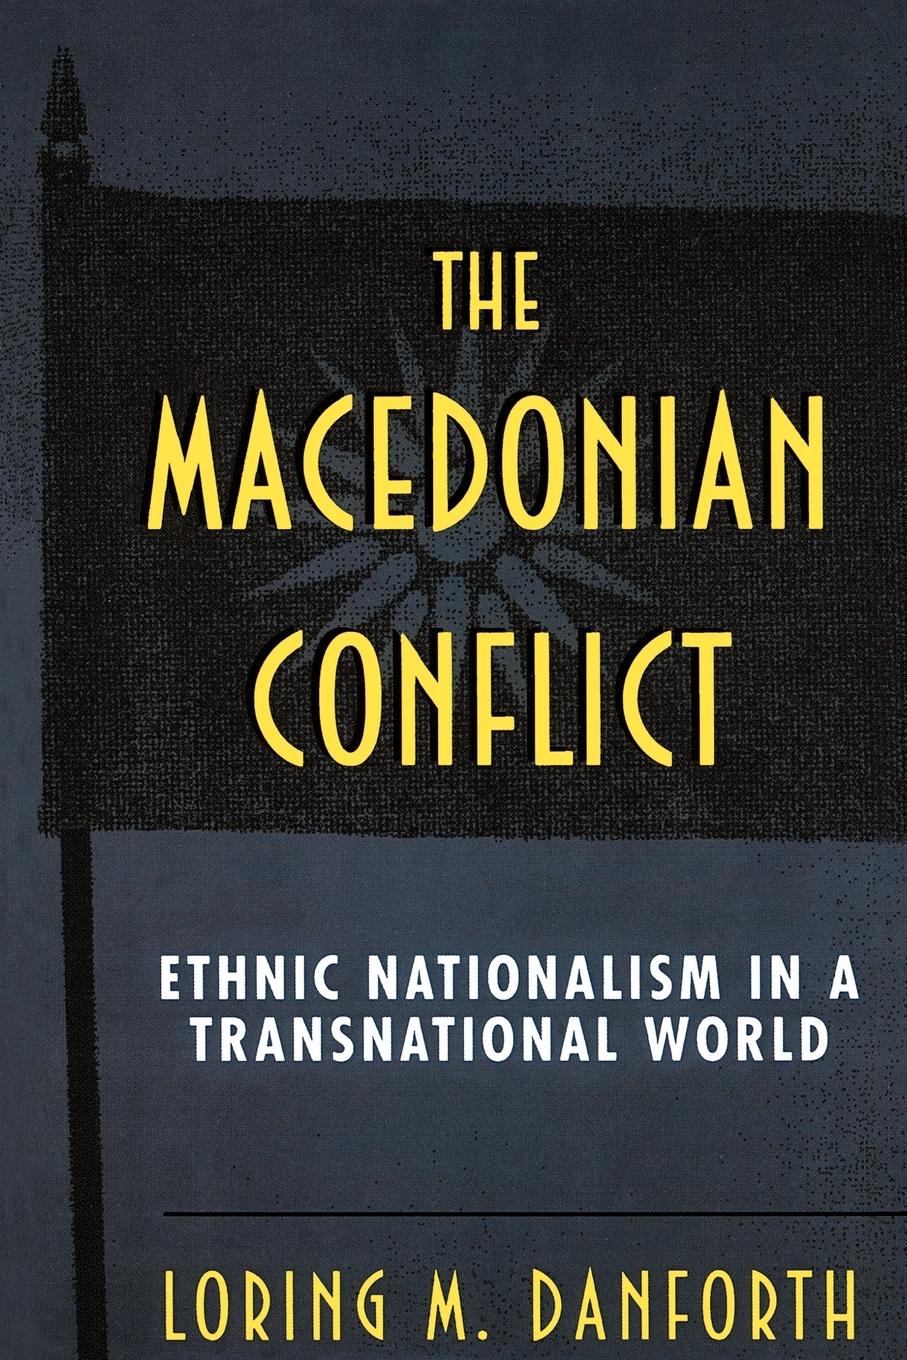 The Macedonian Conflict | Ethnic Nationalism in a Transnational World | Loring M. Danforth | Taschenbuch | Paperback | Englisch | 1997 | Princeton University Press | EAN 9780691043562 - Danforth, Loring M.